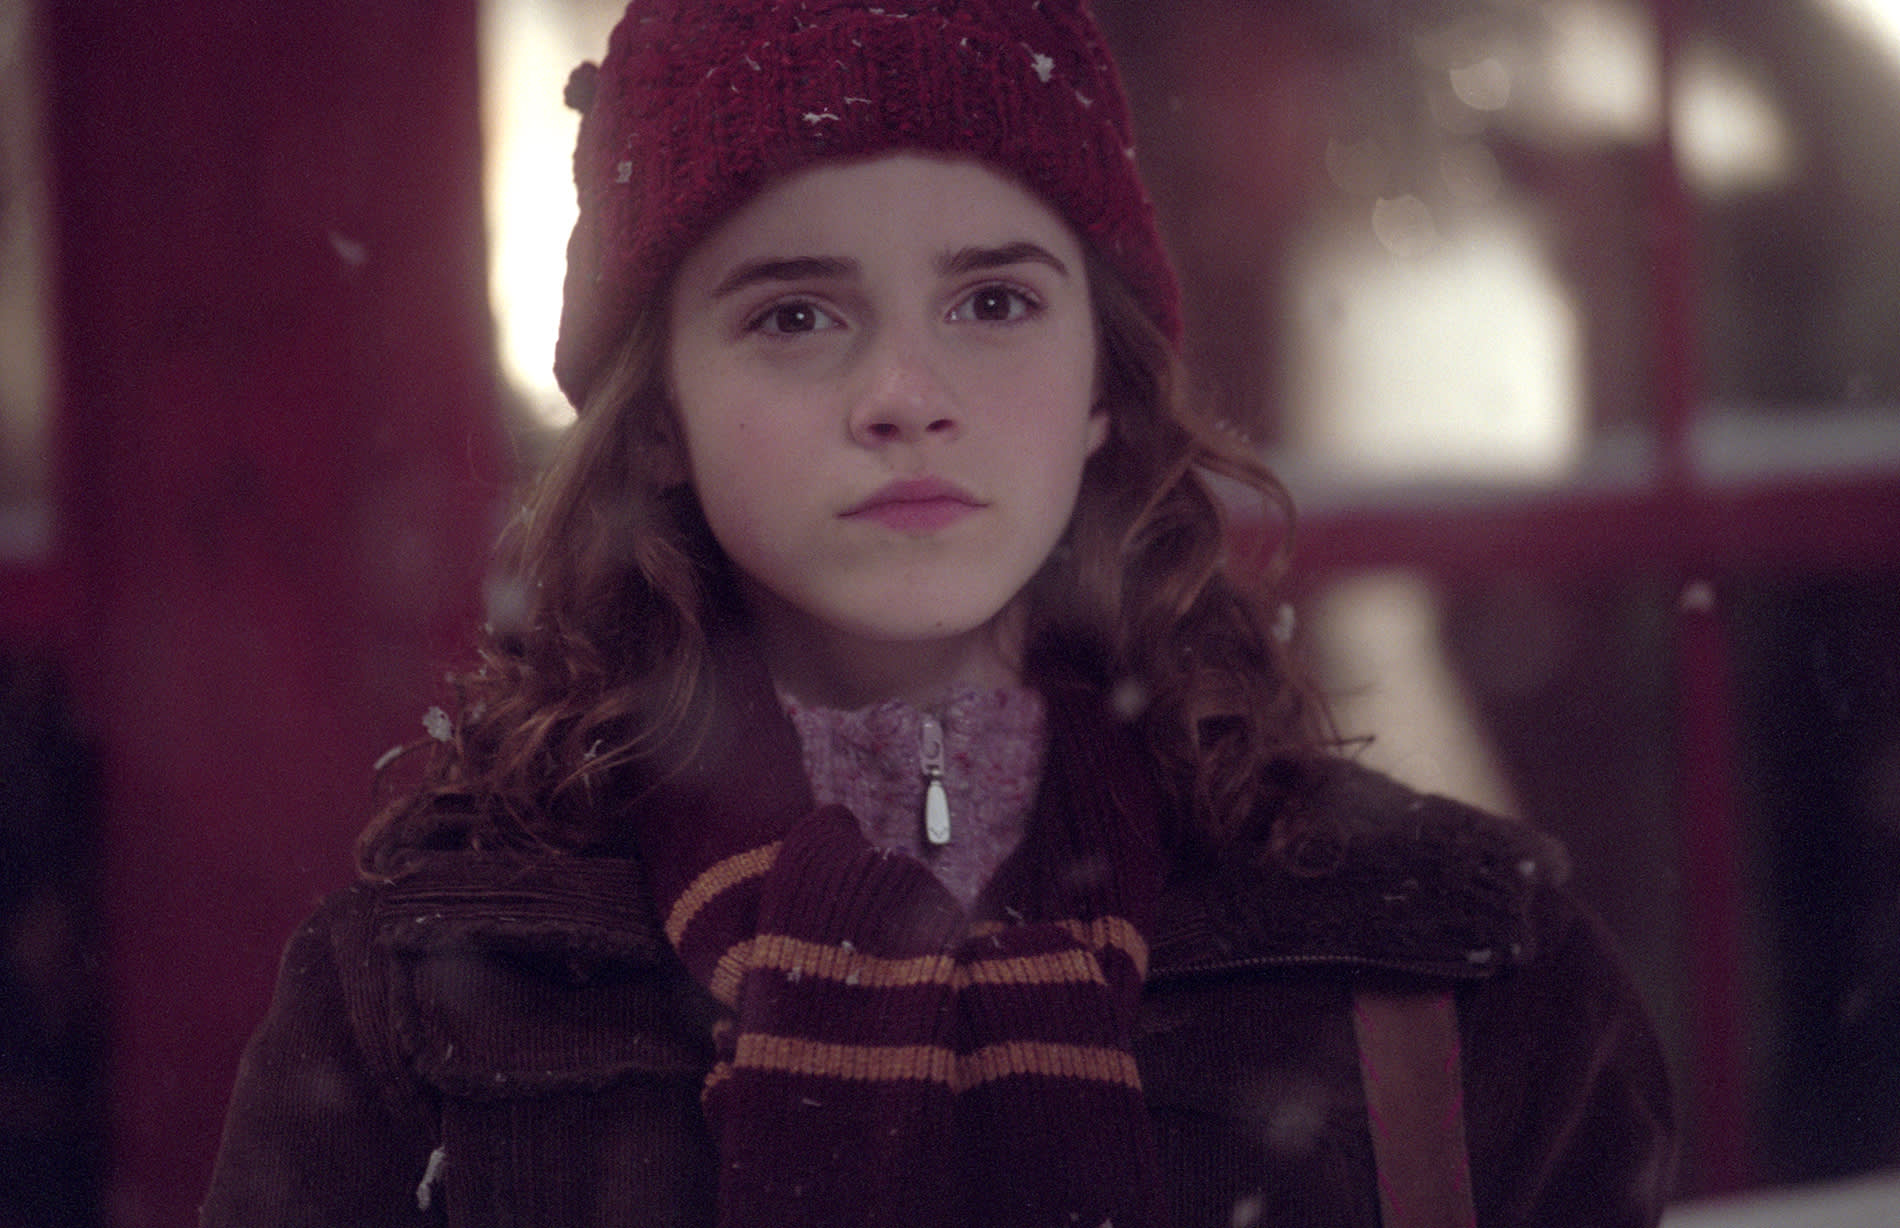 Hermione standing in the snow, wrapped up warm in a hat and scarf.